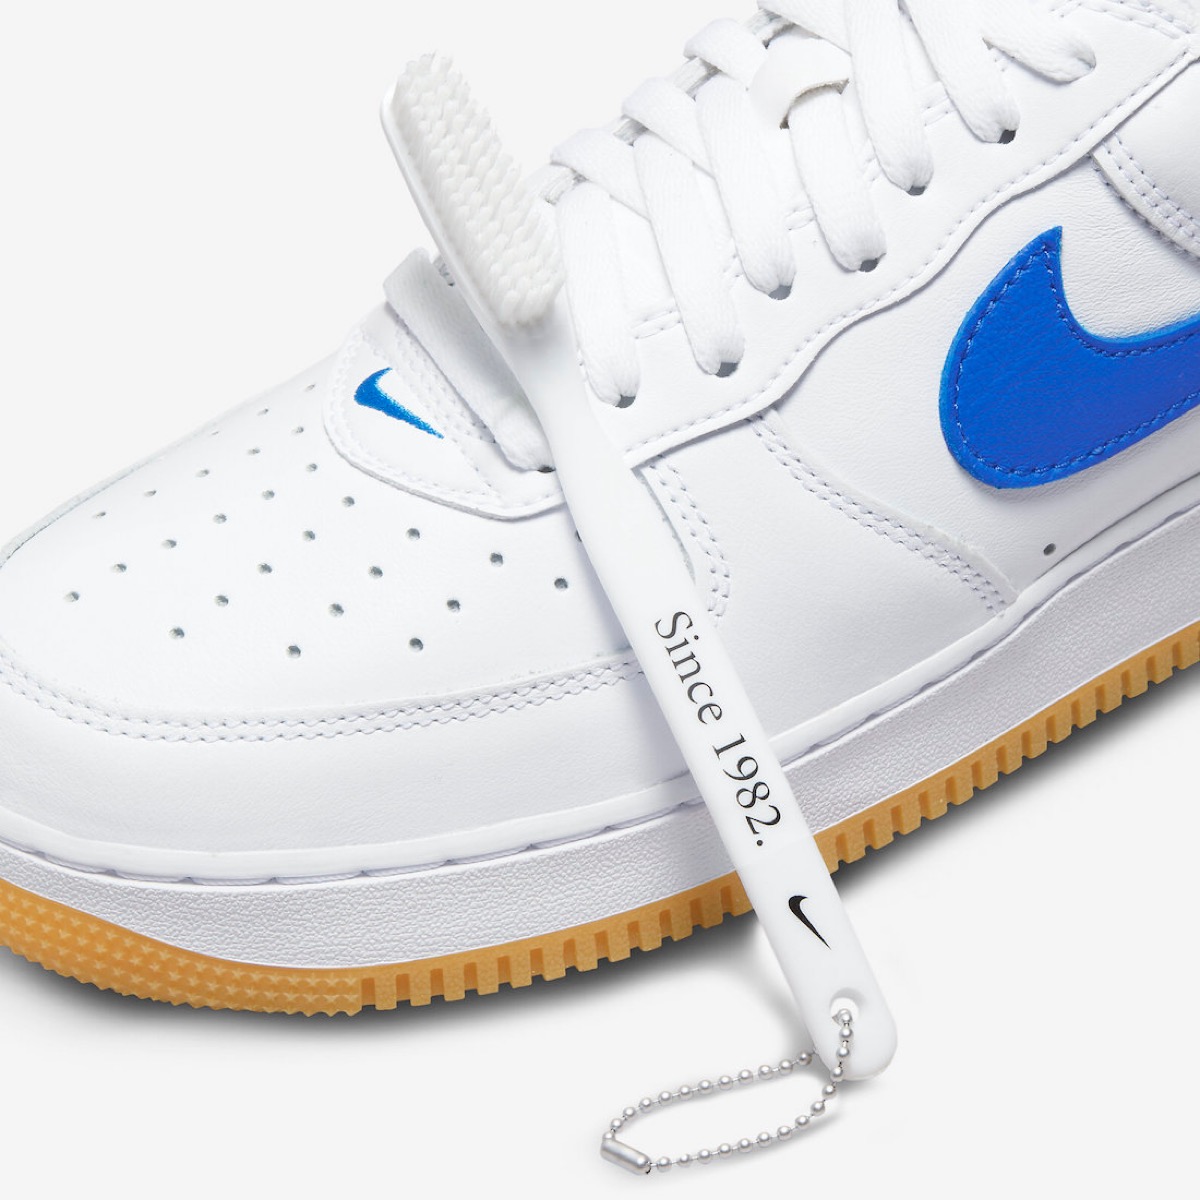 Nike Air Force 1 Low Retro Anniversary Edition “Since 1982.” White 